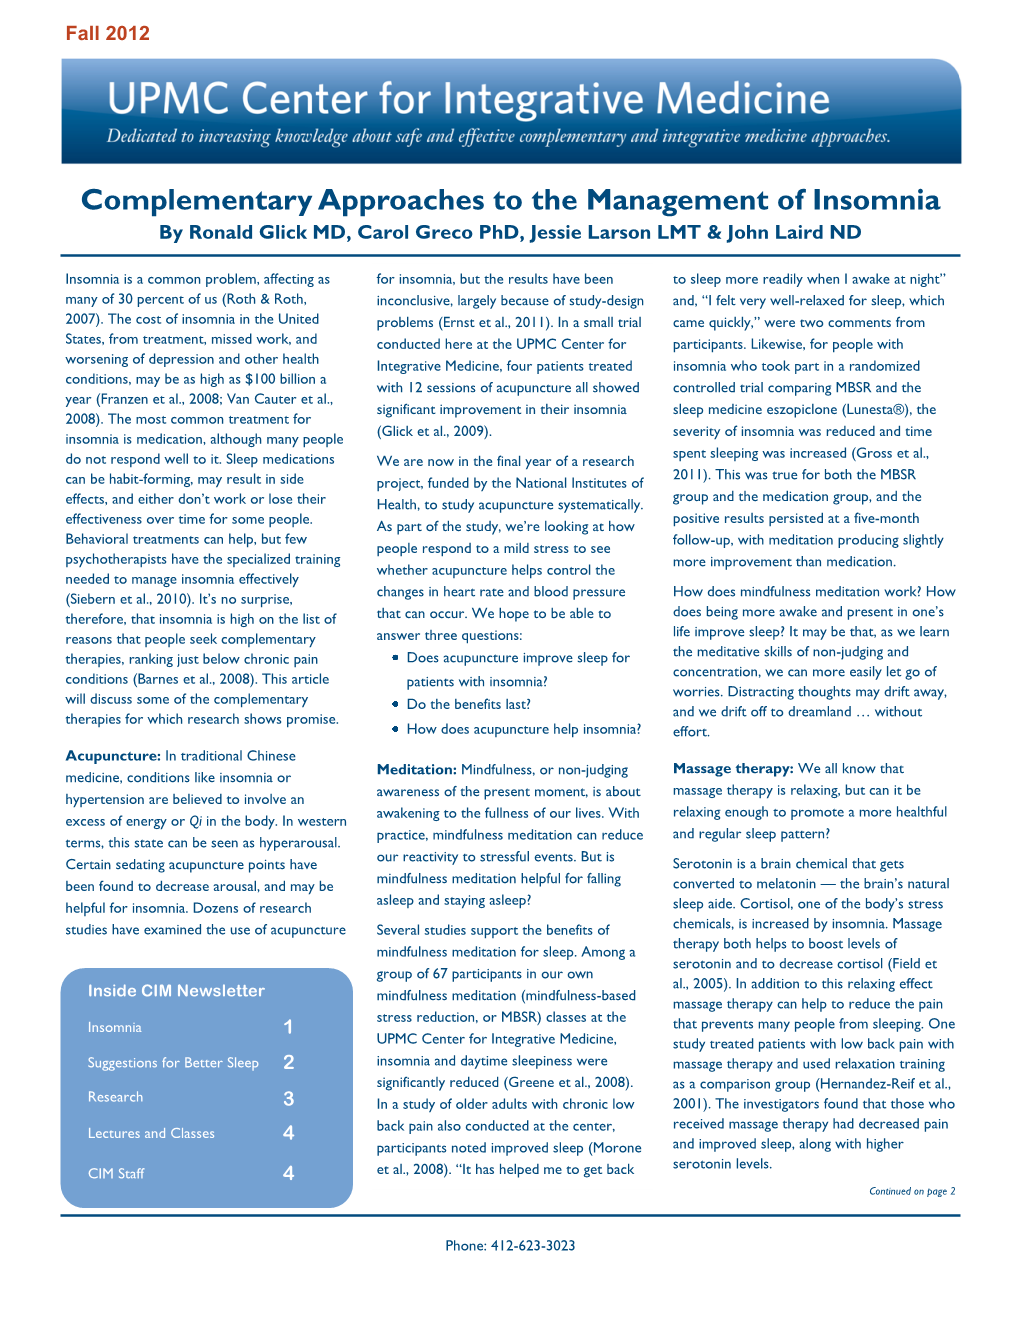 Complementary Approaches to the Management of Insomnia by Ronald Glick MD, Carol Greco Phd, Jessie Larson LMT & John Laird ND